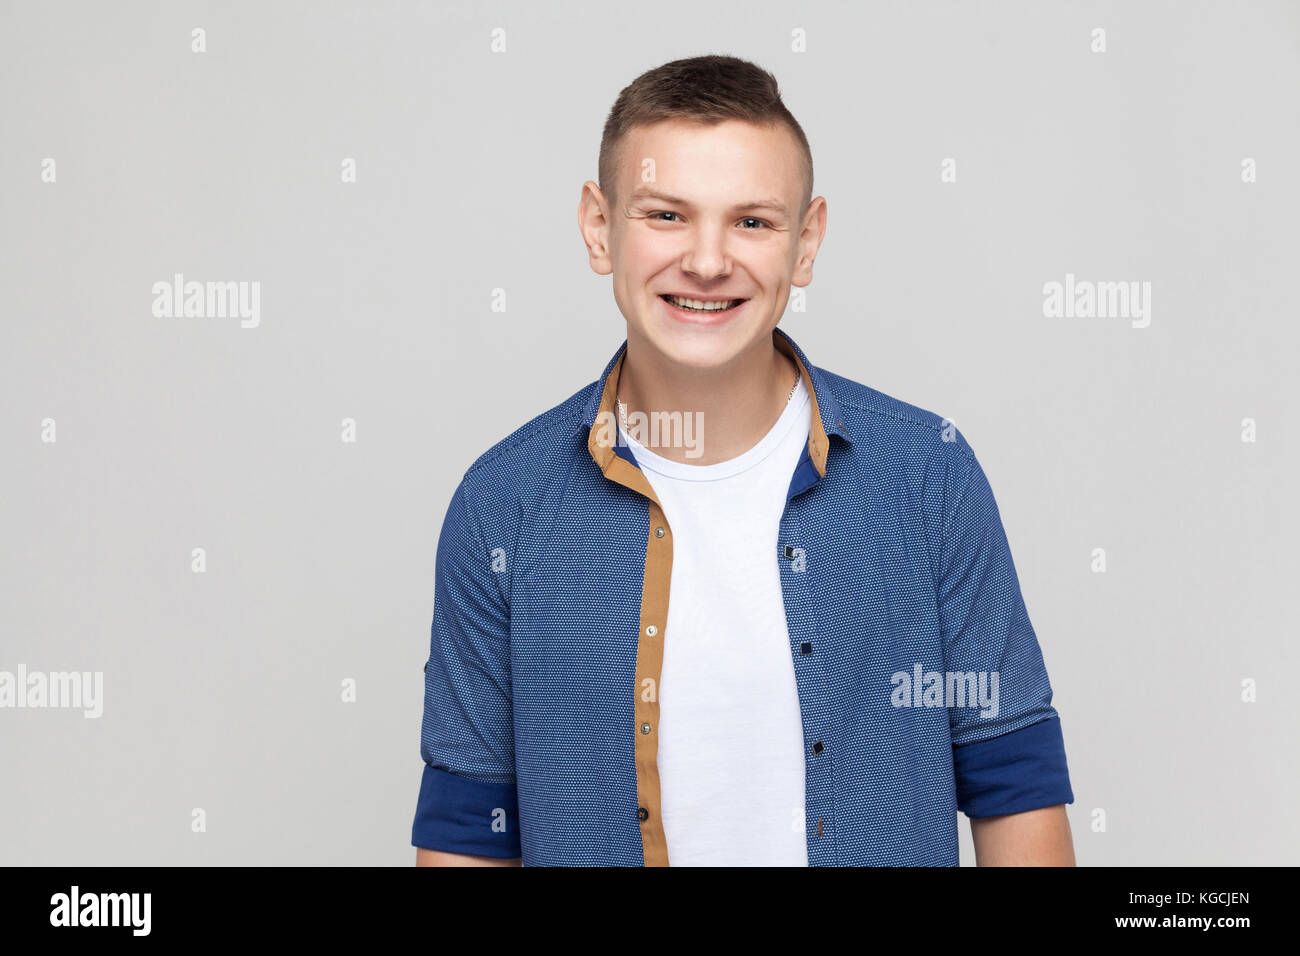 Young success man wearing blue shirt looking at camera and toothy smile. Studio shot, gray background Stock Photo